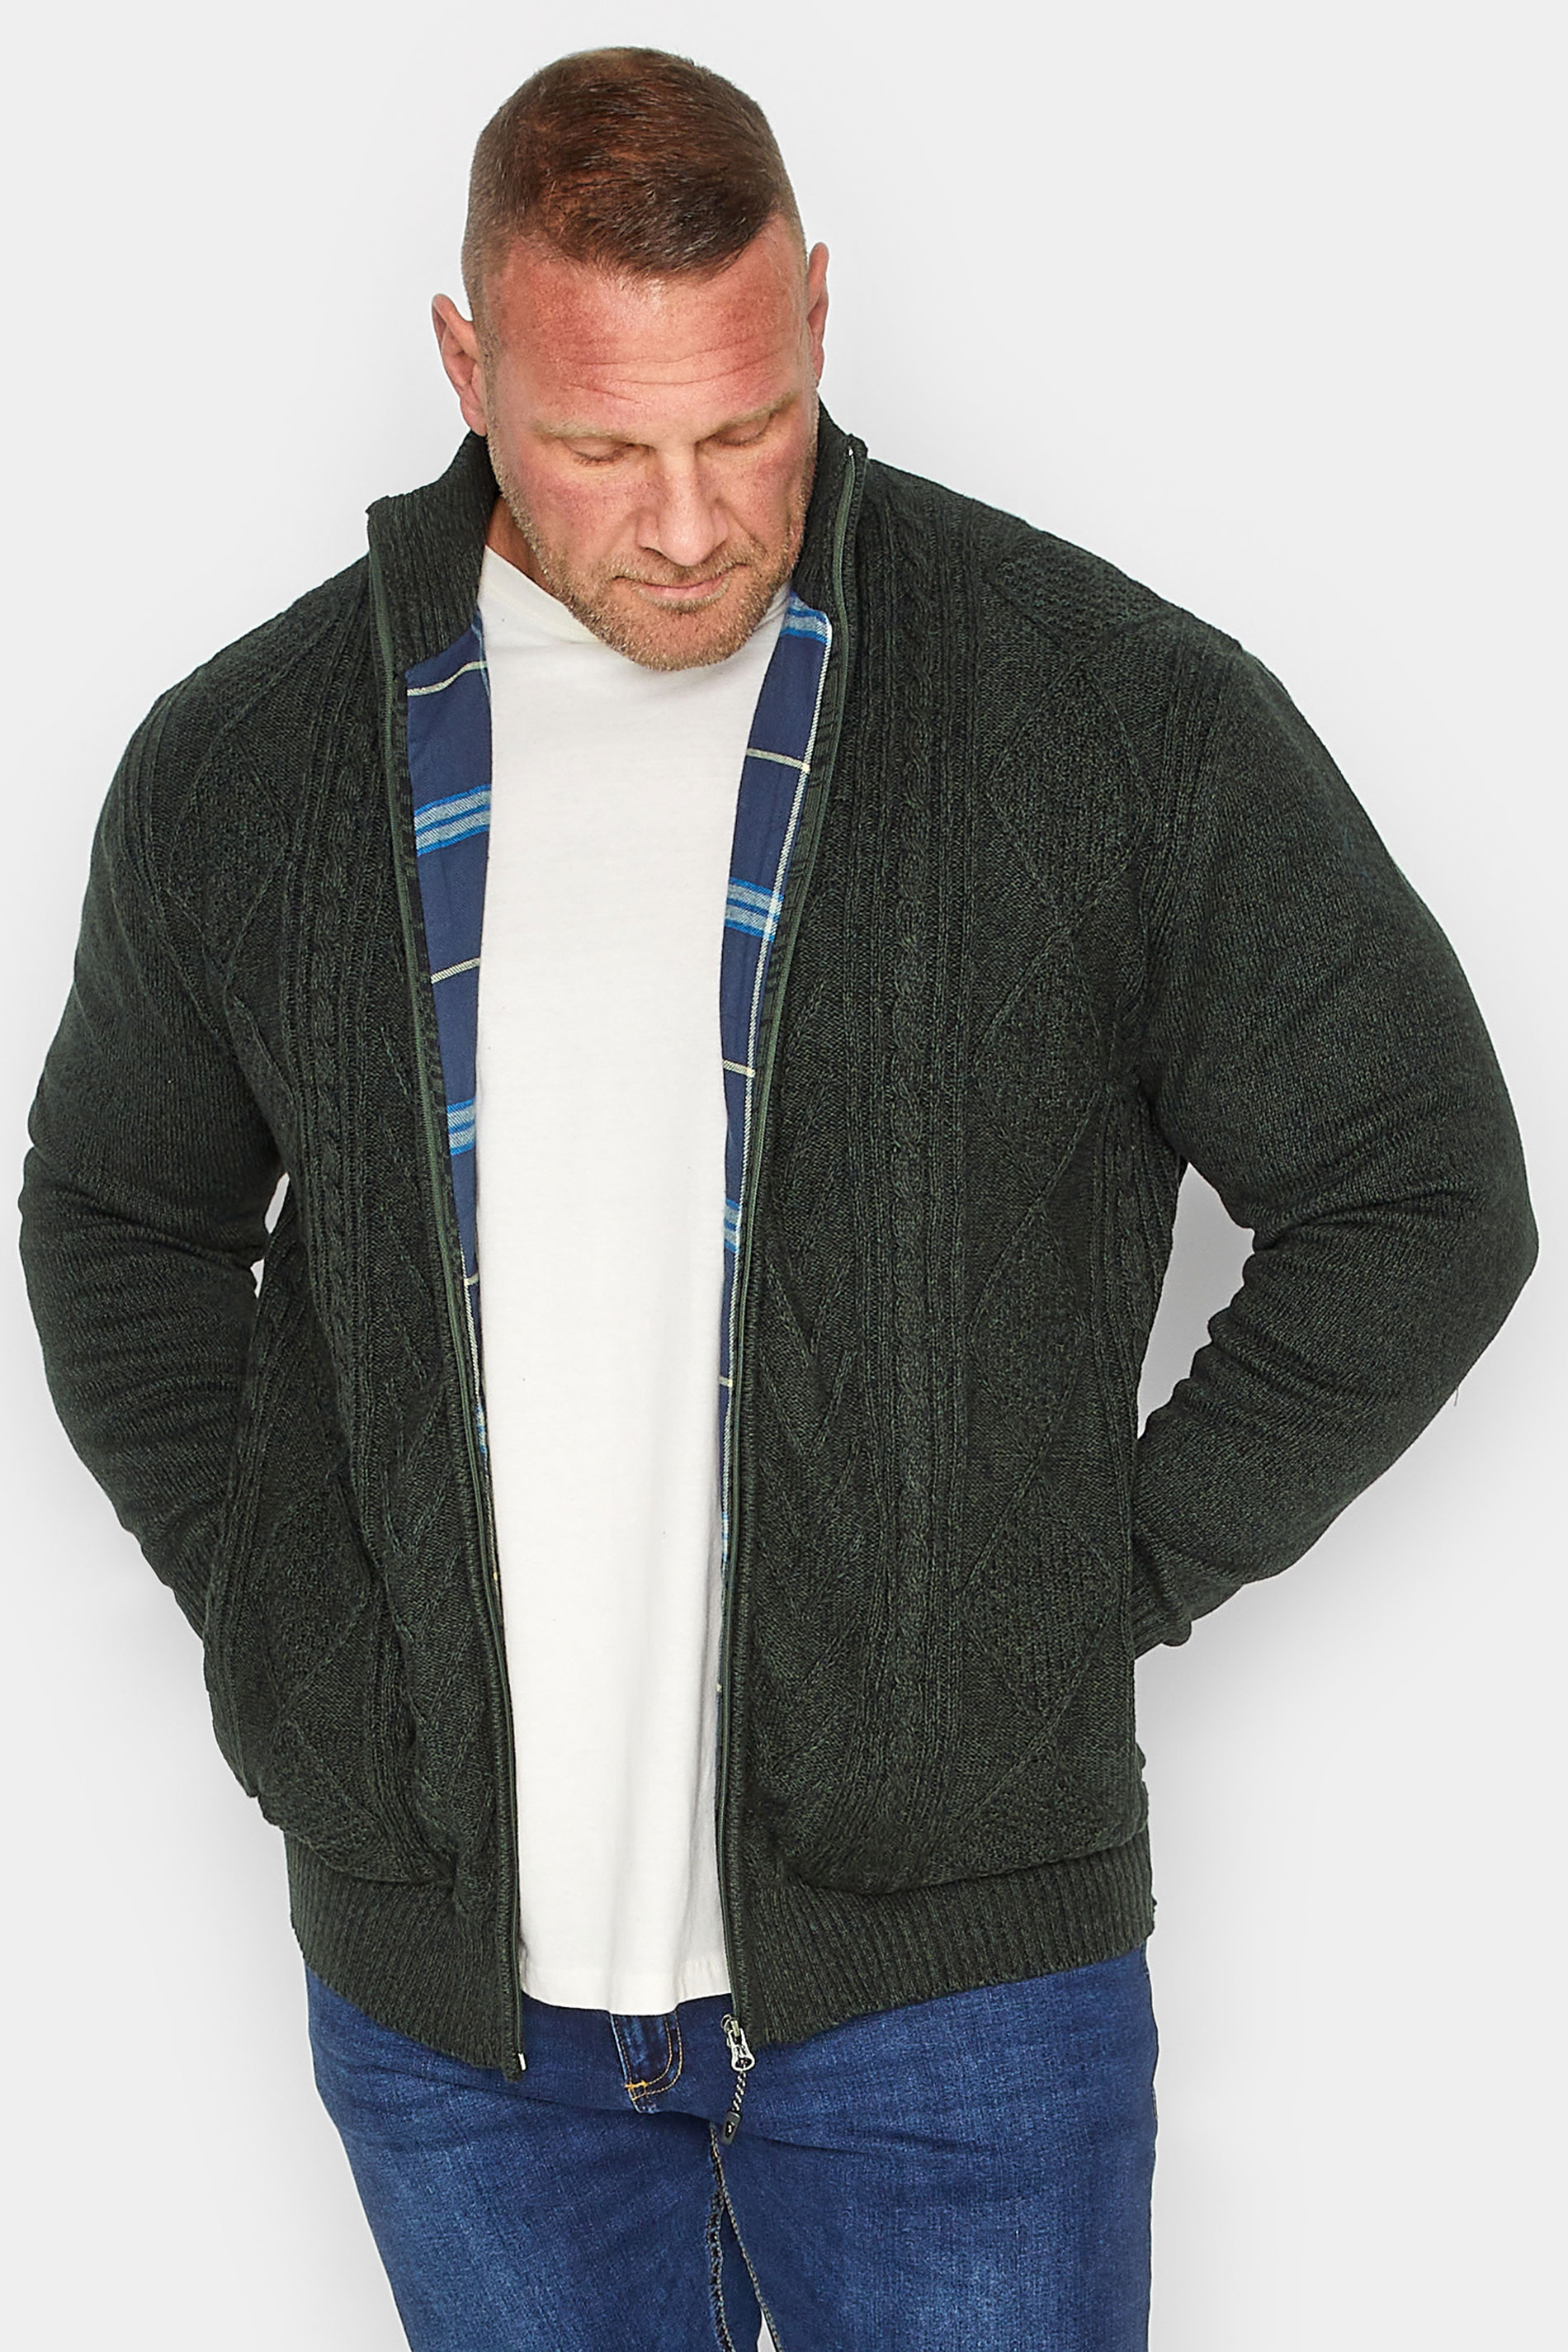 KAM Big & Tall Green Cable Knit Lined Cardigan | BadRhino 1